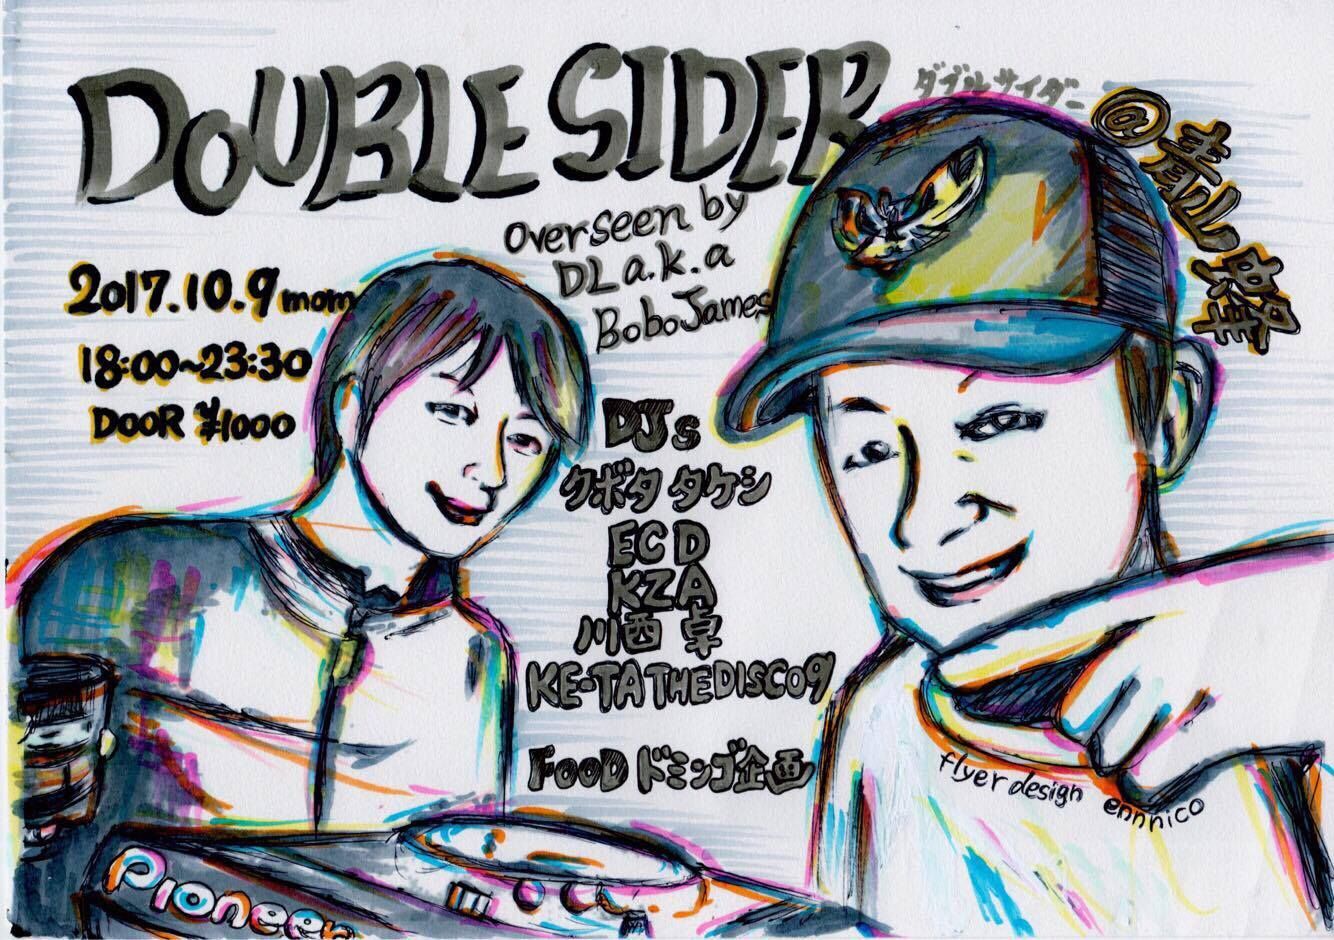 DOUBLE SIDER